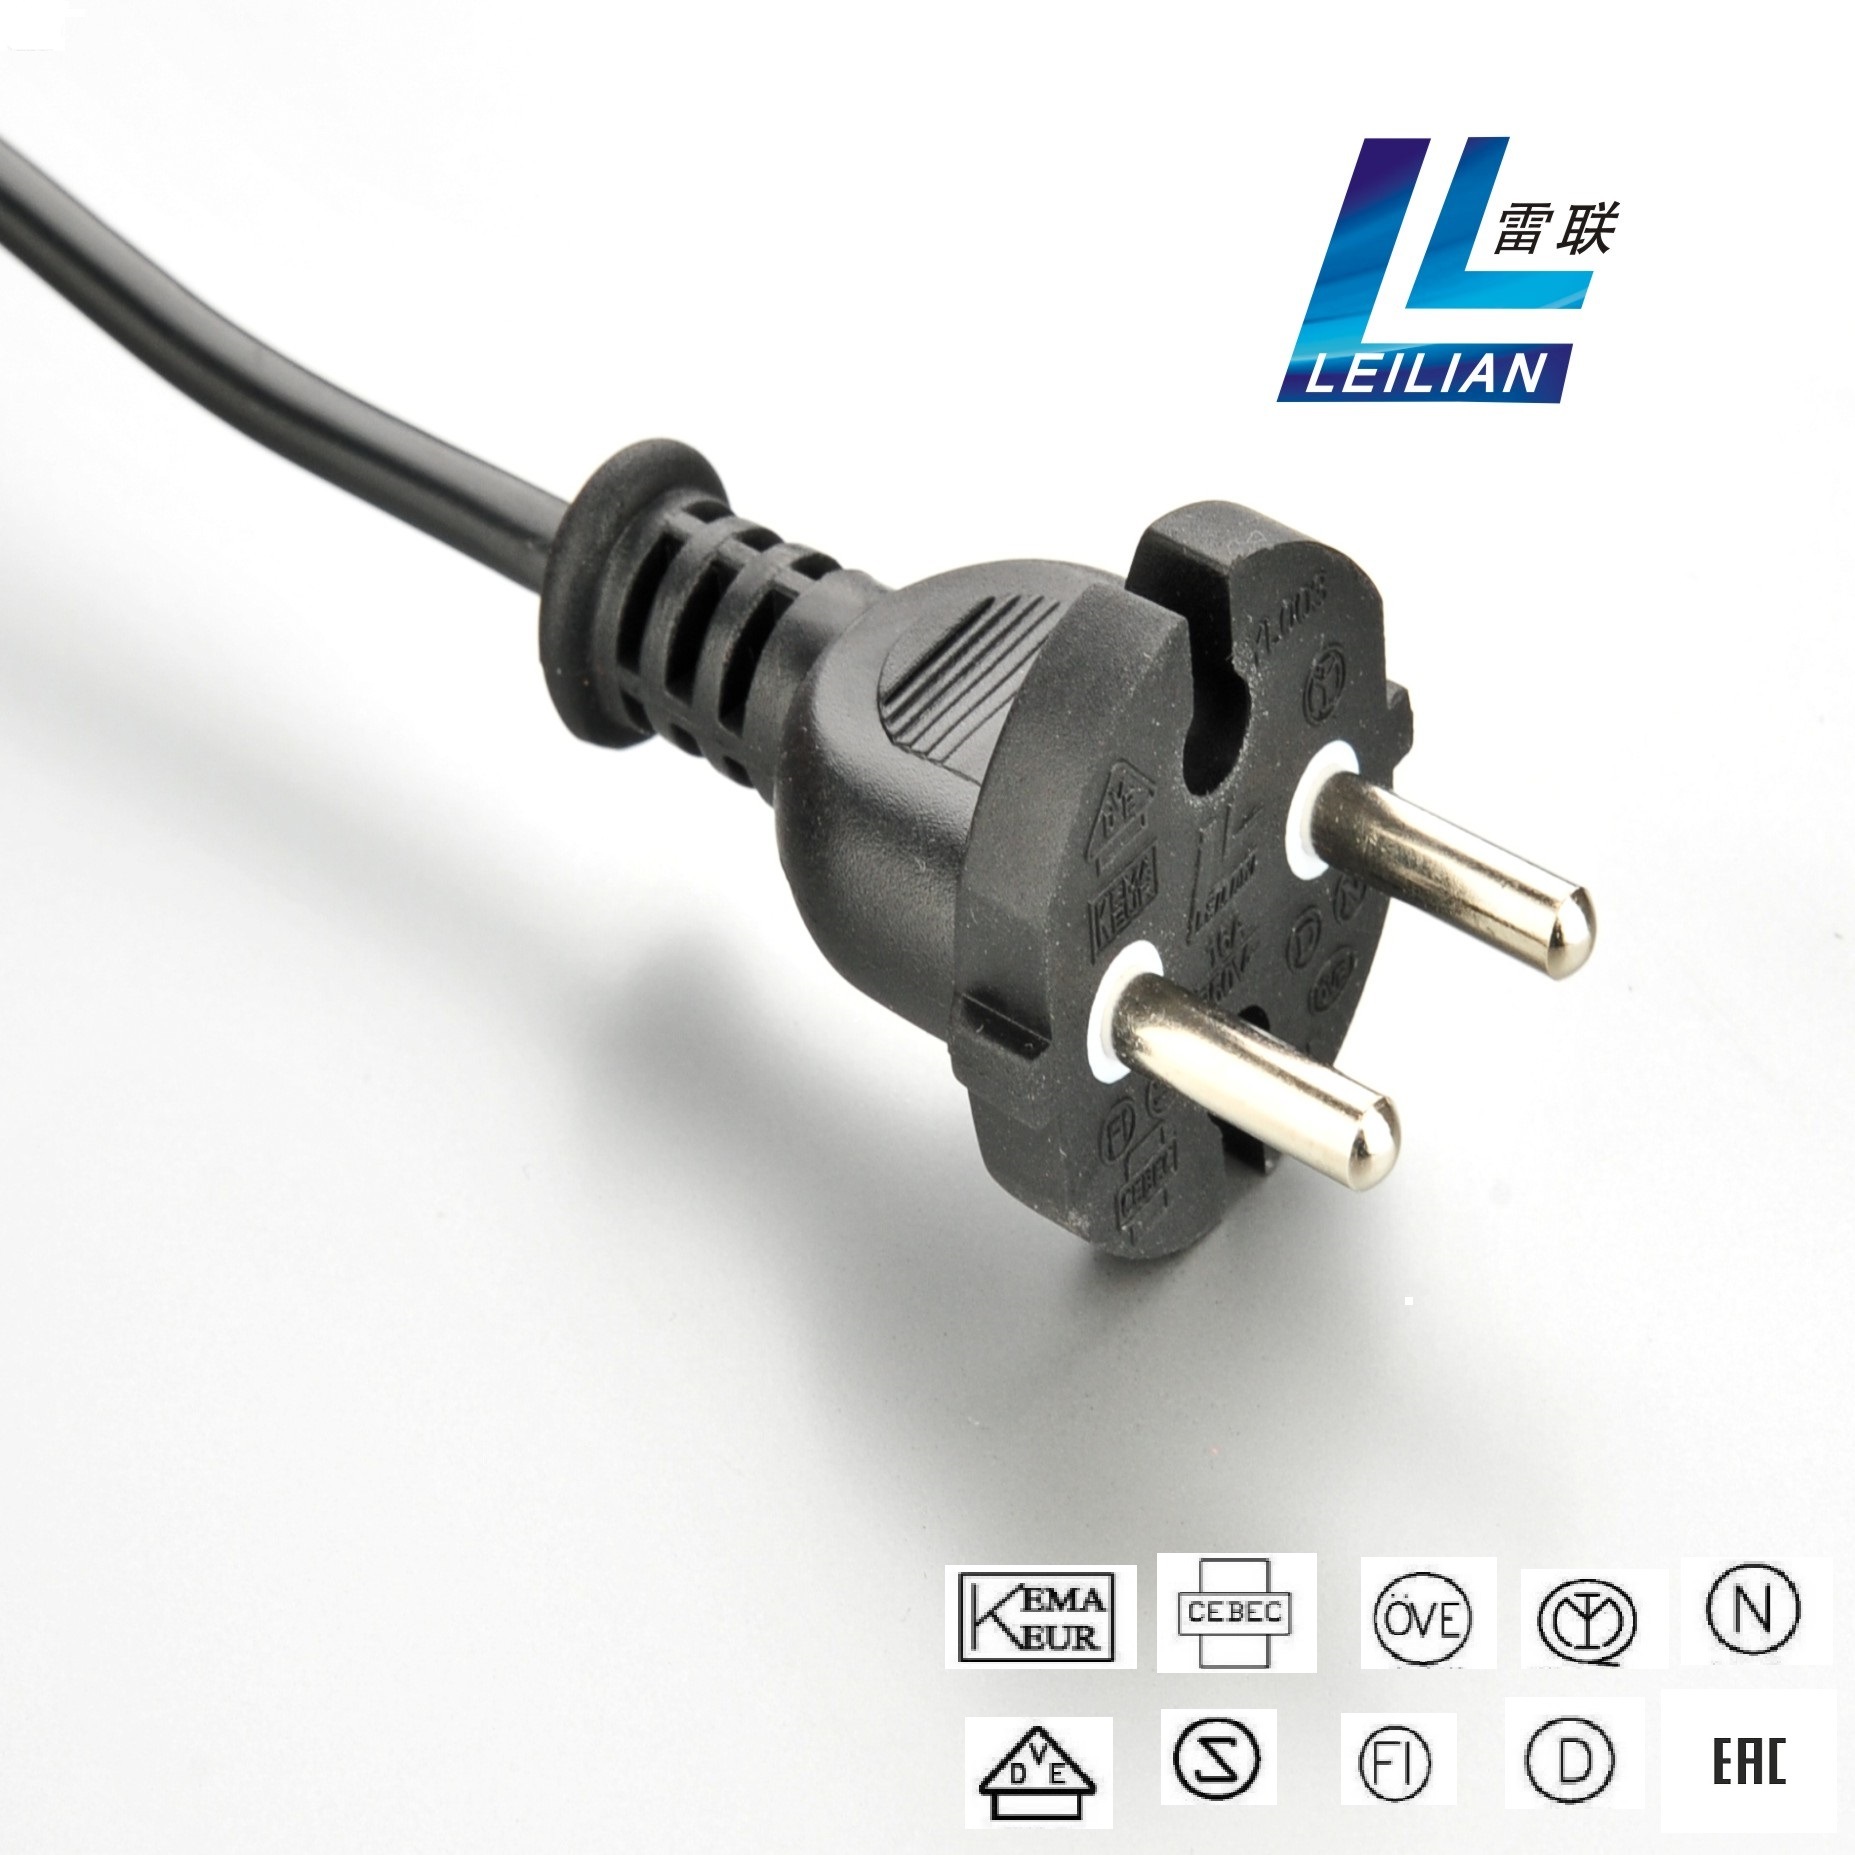 The EU Nations Power Cord Plug with Two Pins VDE